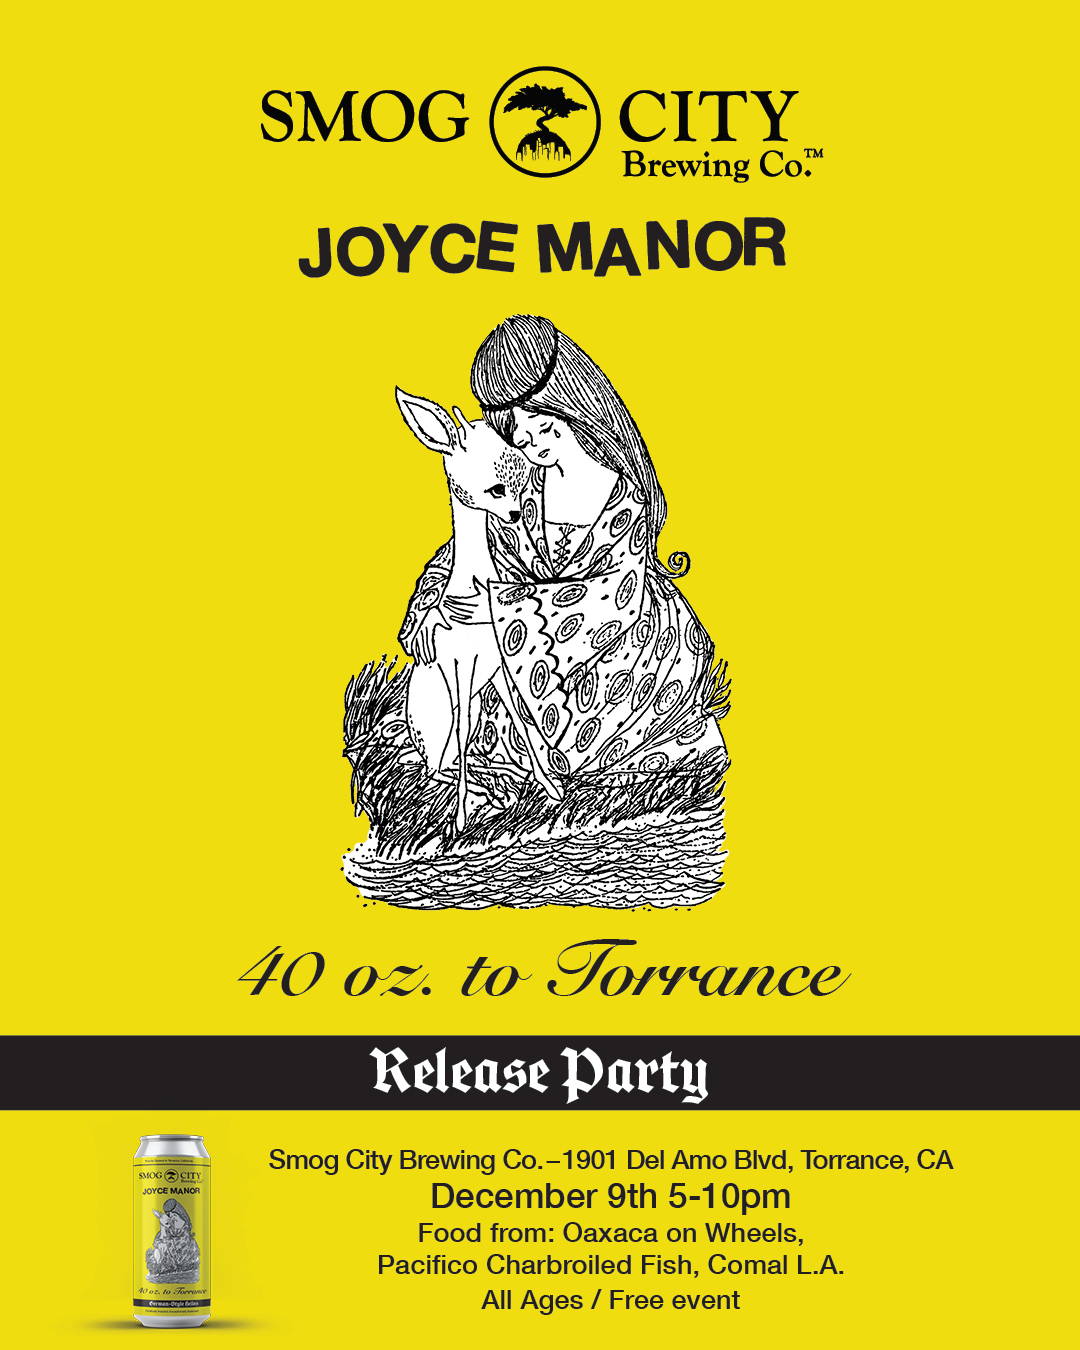 Joyce Manor and Smog City Brewing Company COllaboration Release Party Friday December 9th in Torrance CA. Link to RSVP